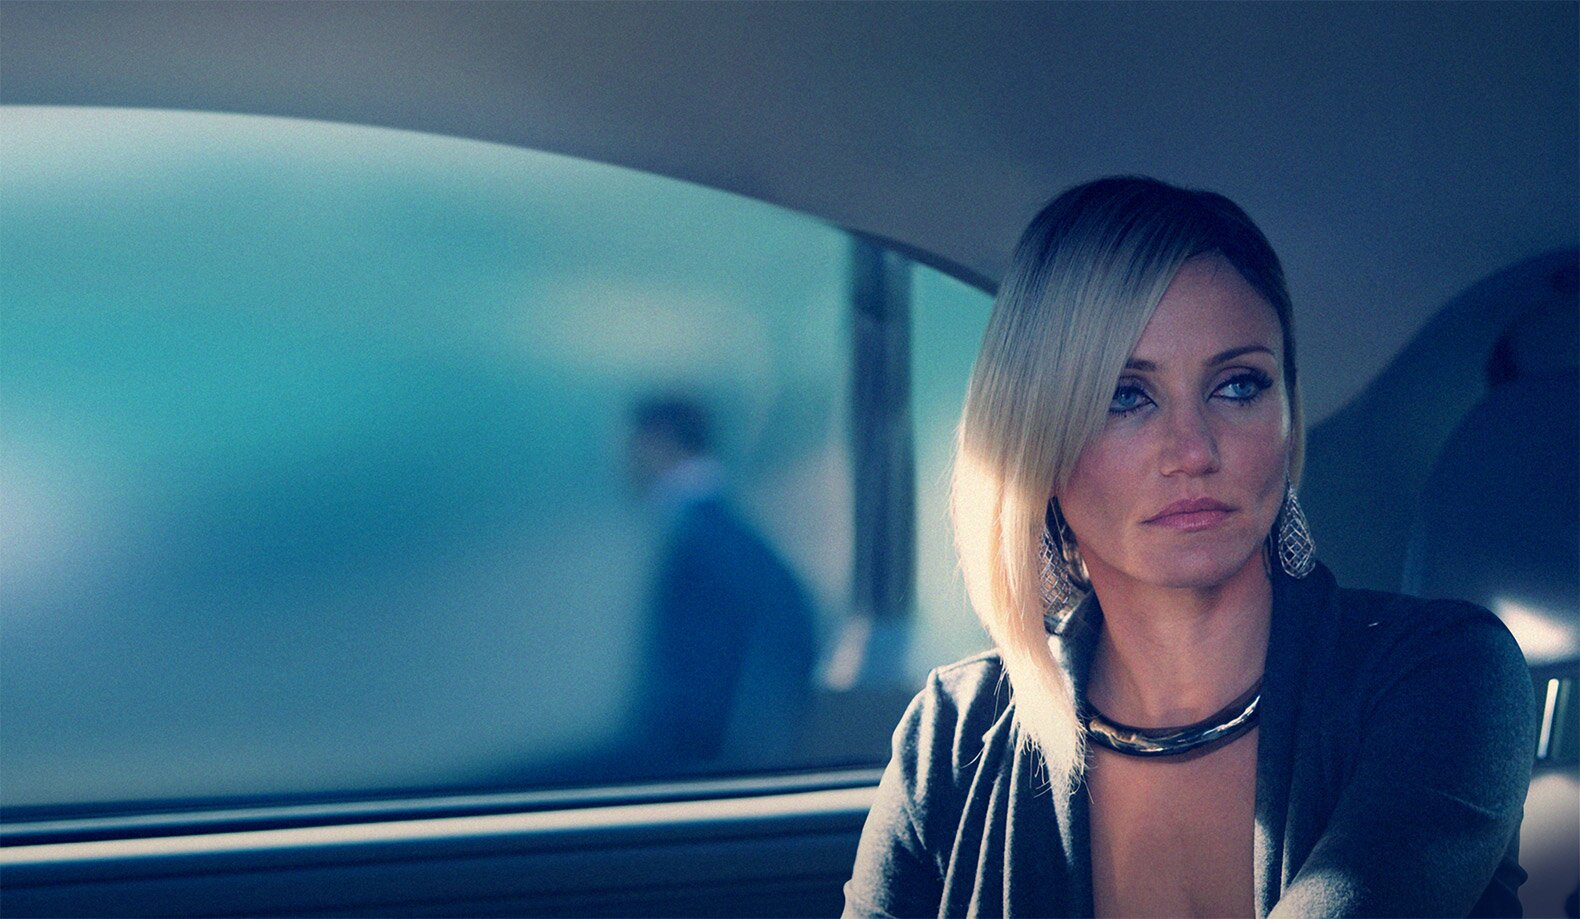 Cameron Diaz in The Counselor